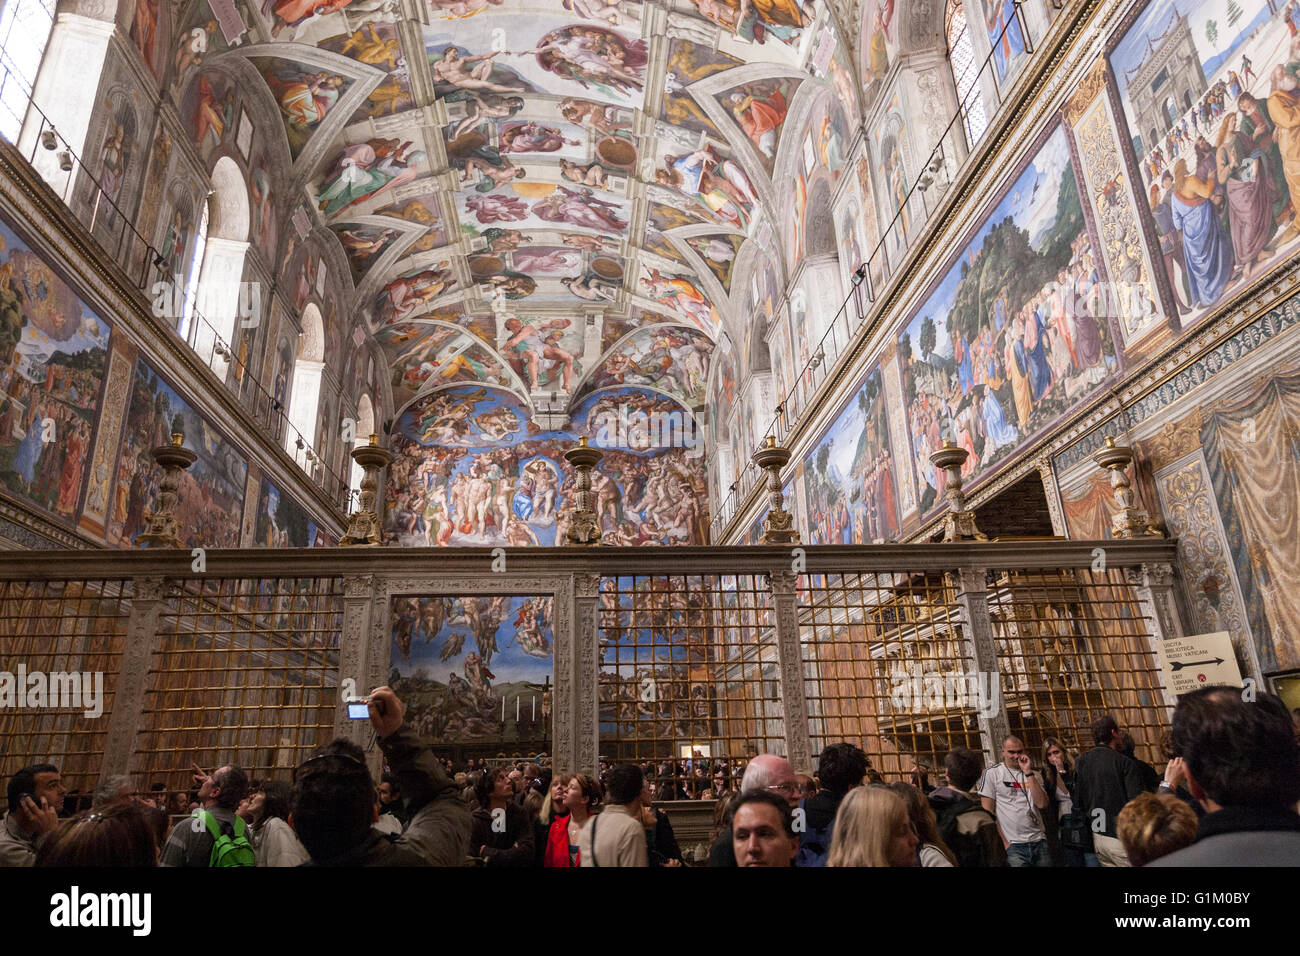 Overcrowd with tourist in the Sistine Chapel, ceiling painted by Michelangelo, from the entrance wall Stock Photo